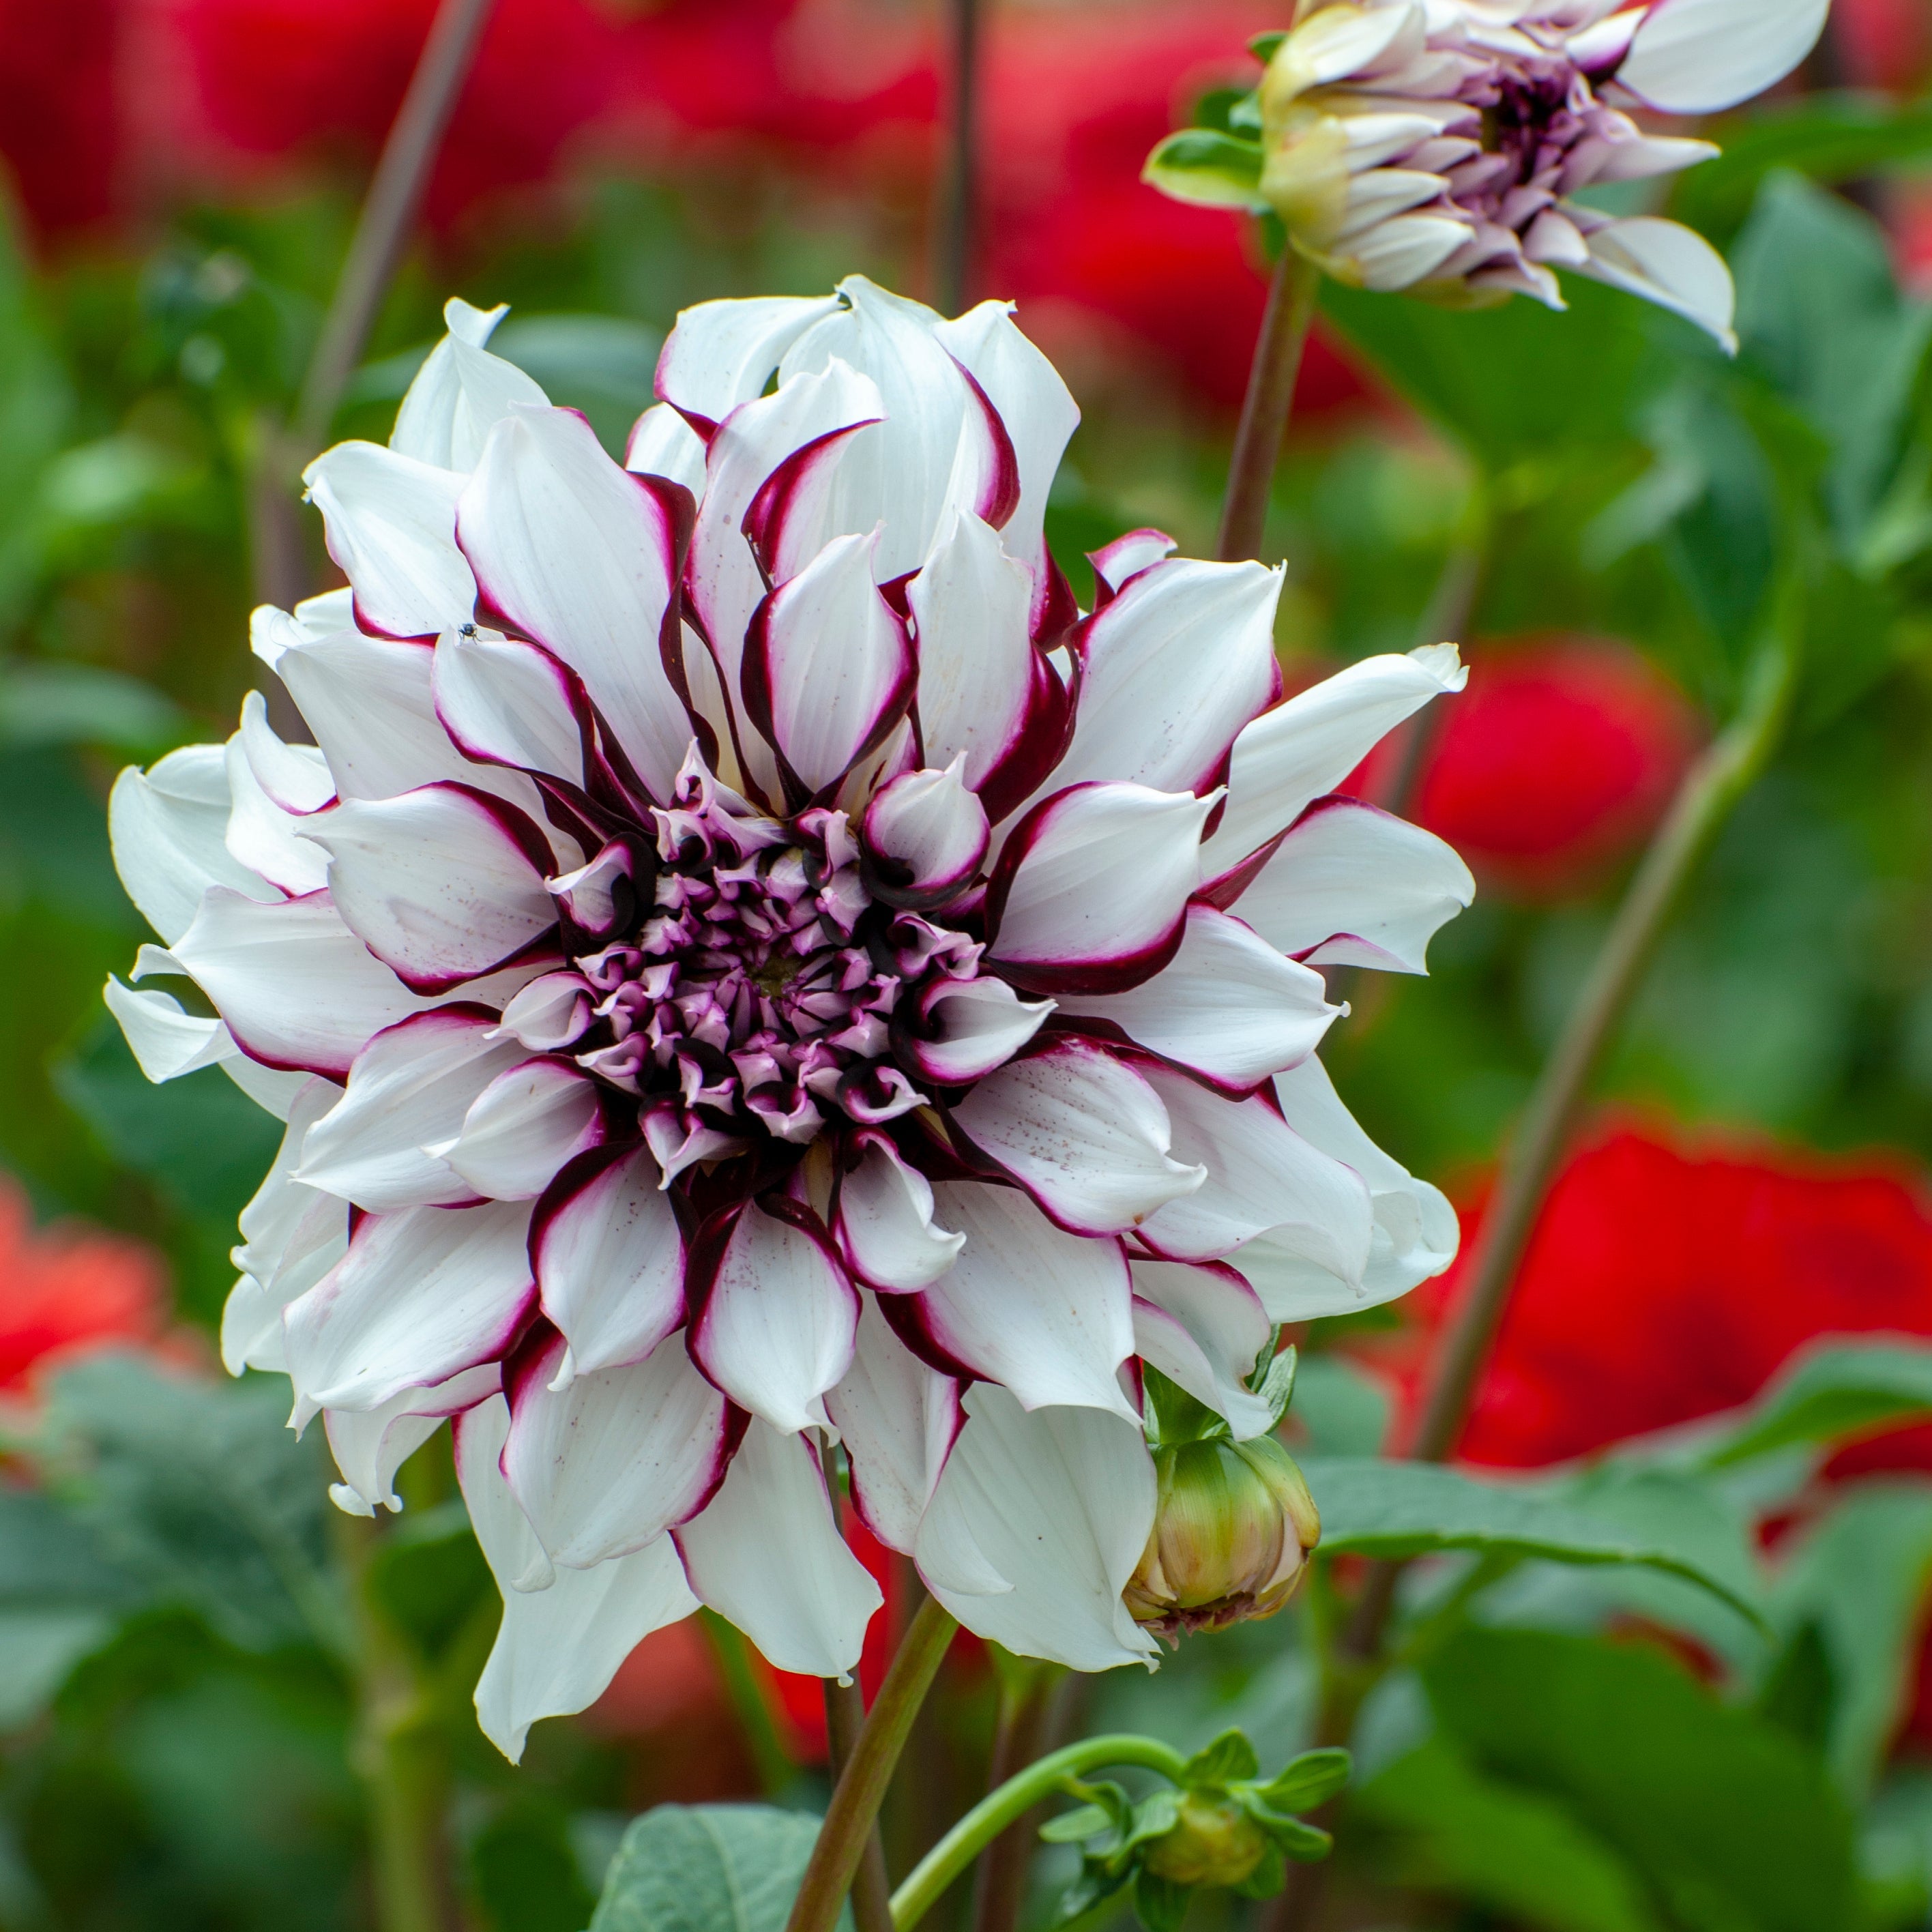 Dahlia 'Tartan' decorative large flowered - 2, 3 or 5 tubers - Free delivery within the UK